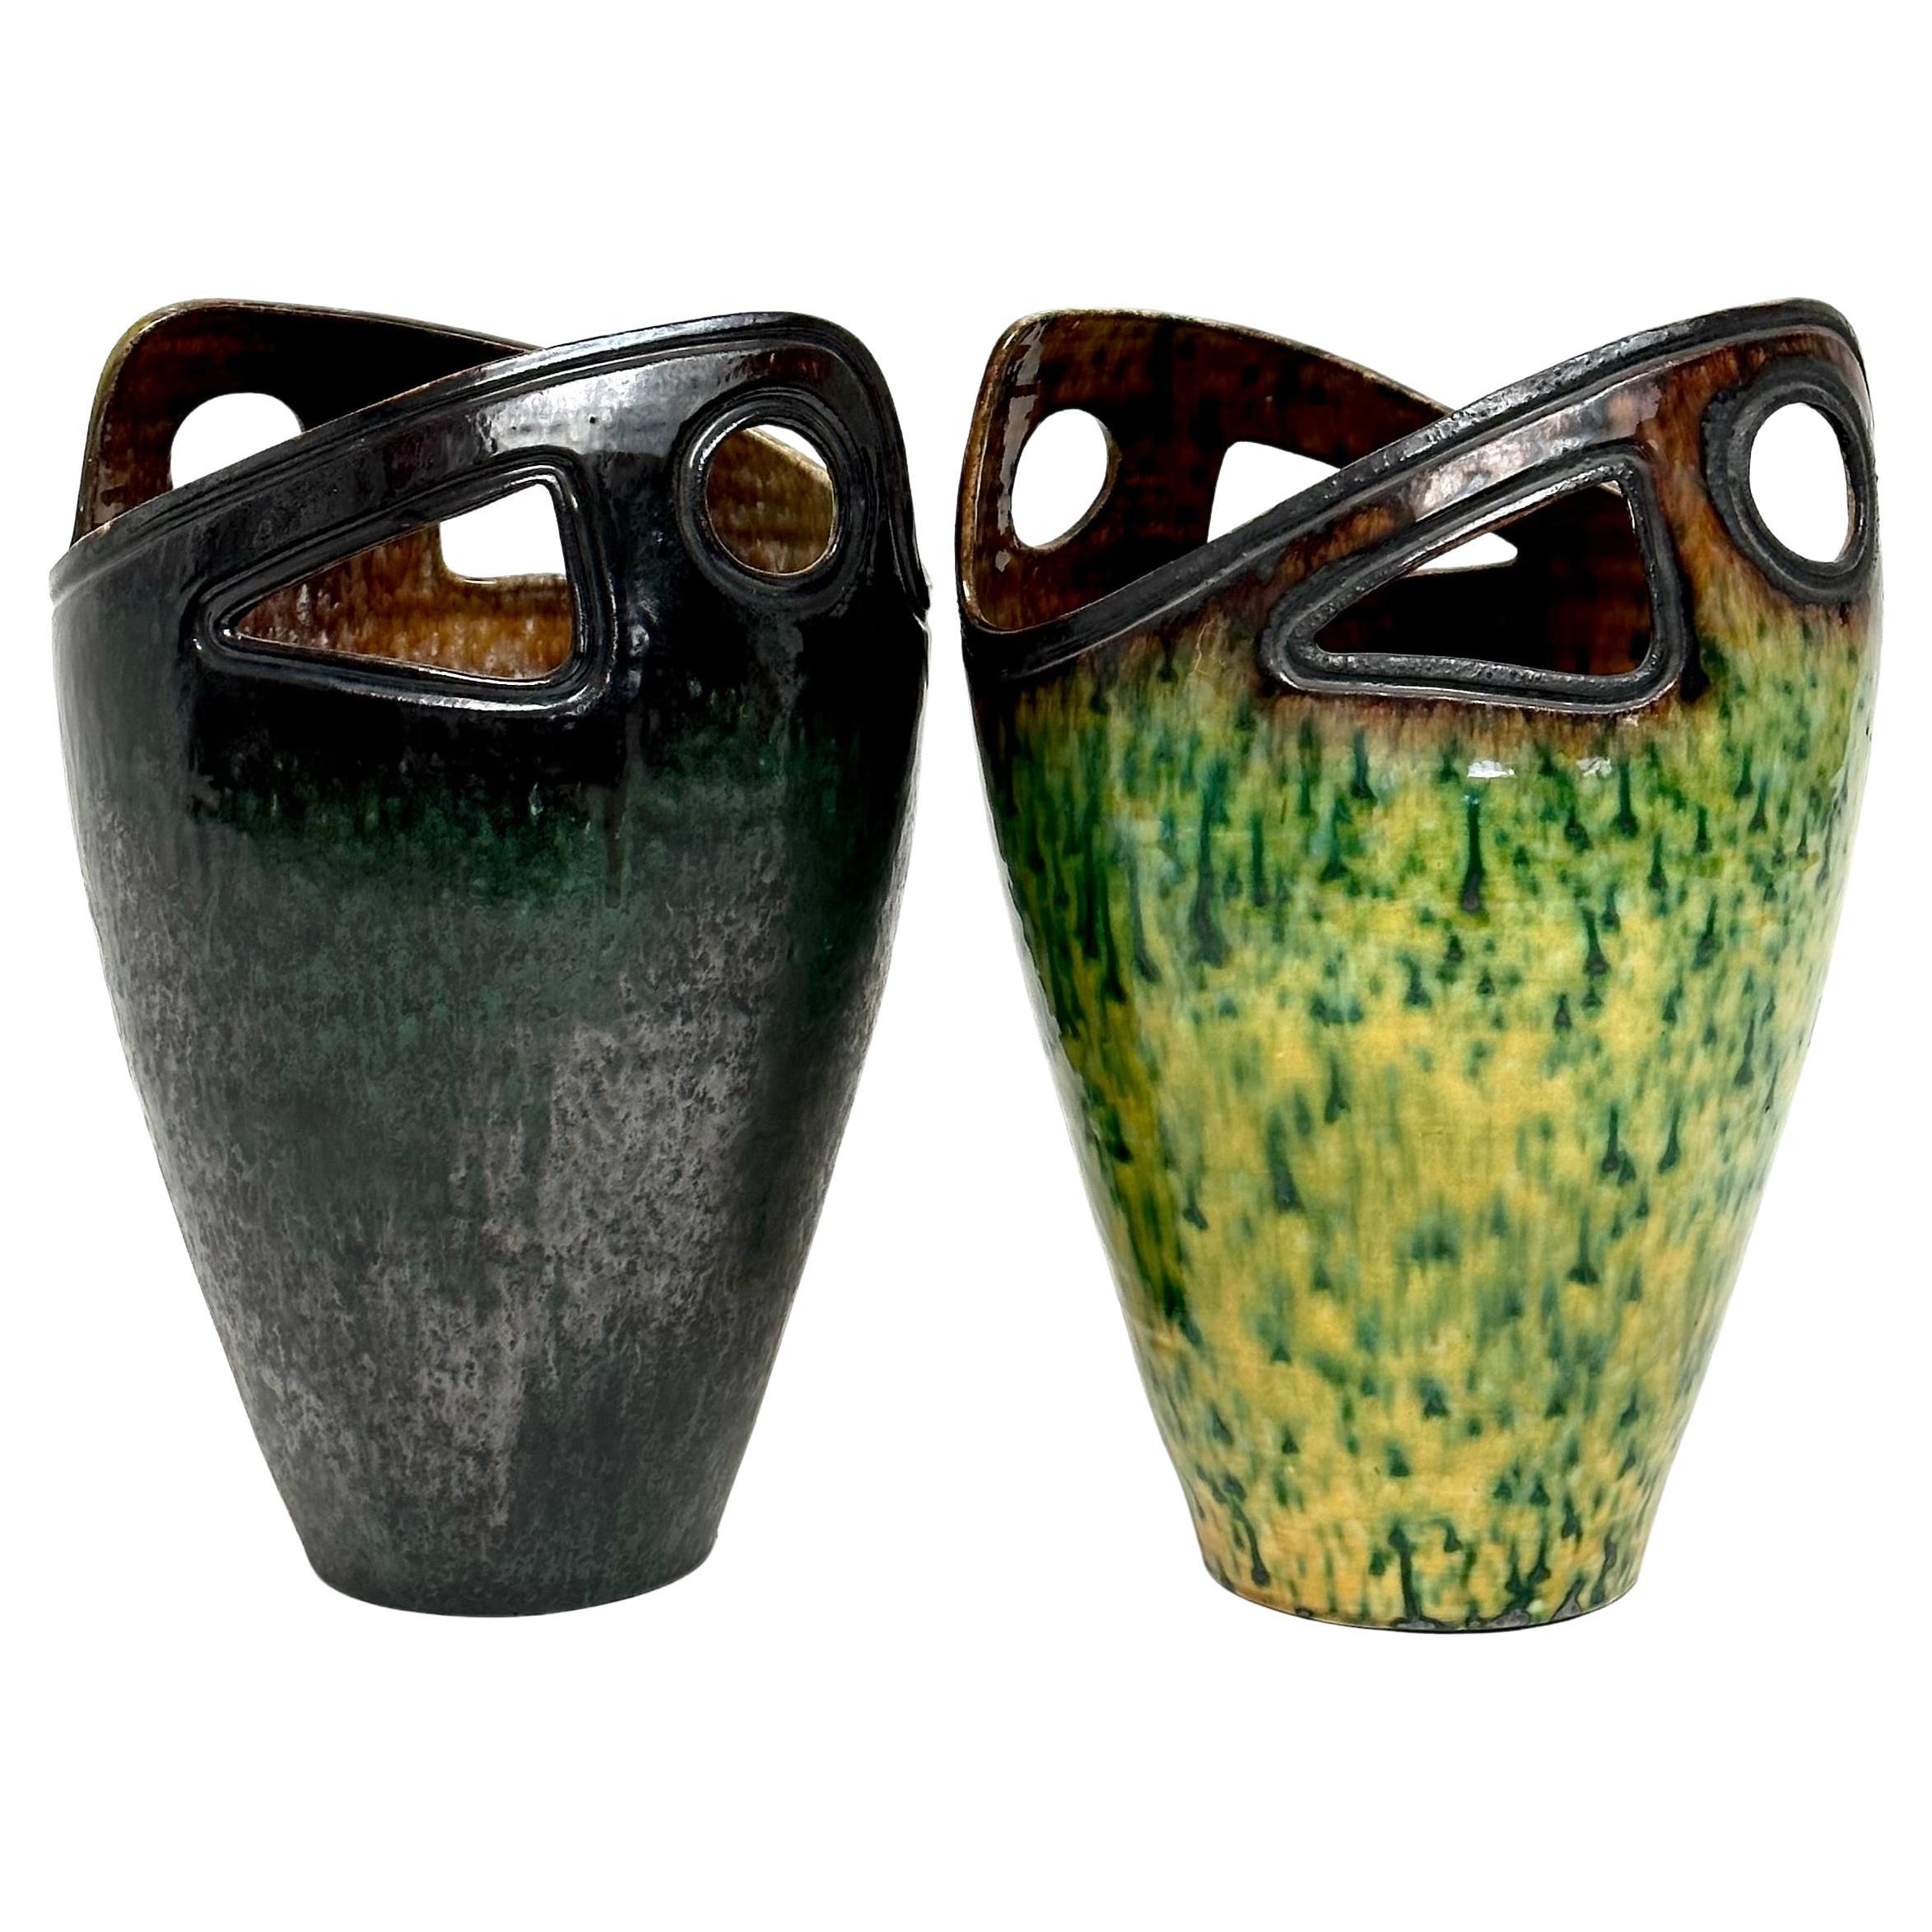 Pair of "Dinosaurus" Vases by Accolay - c. 1960 For Sale